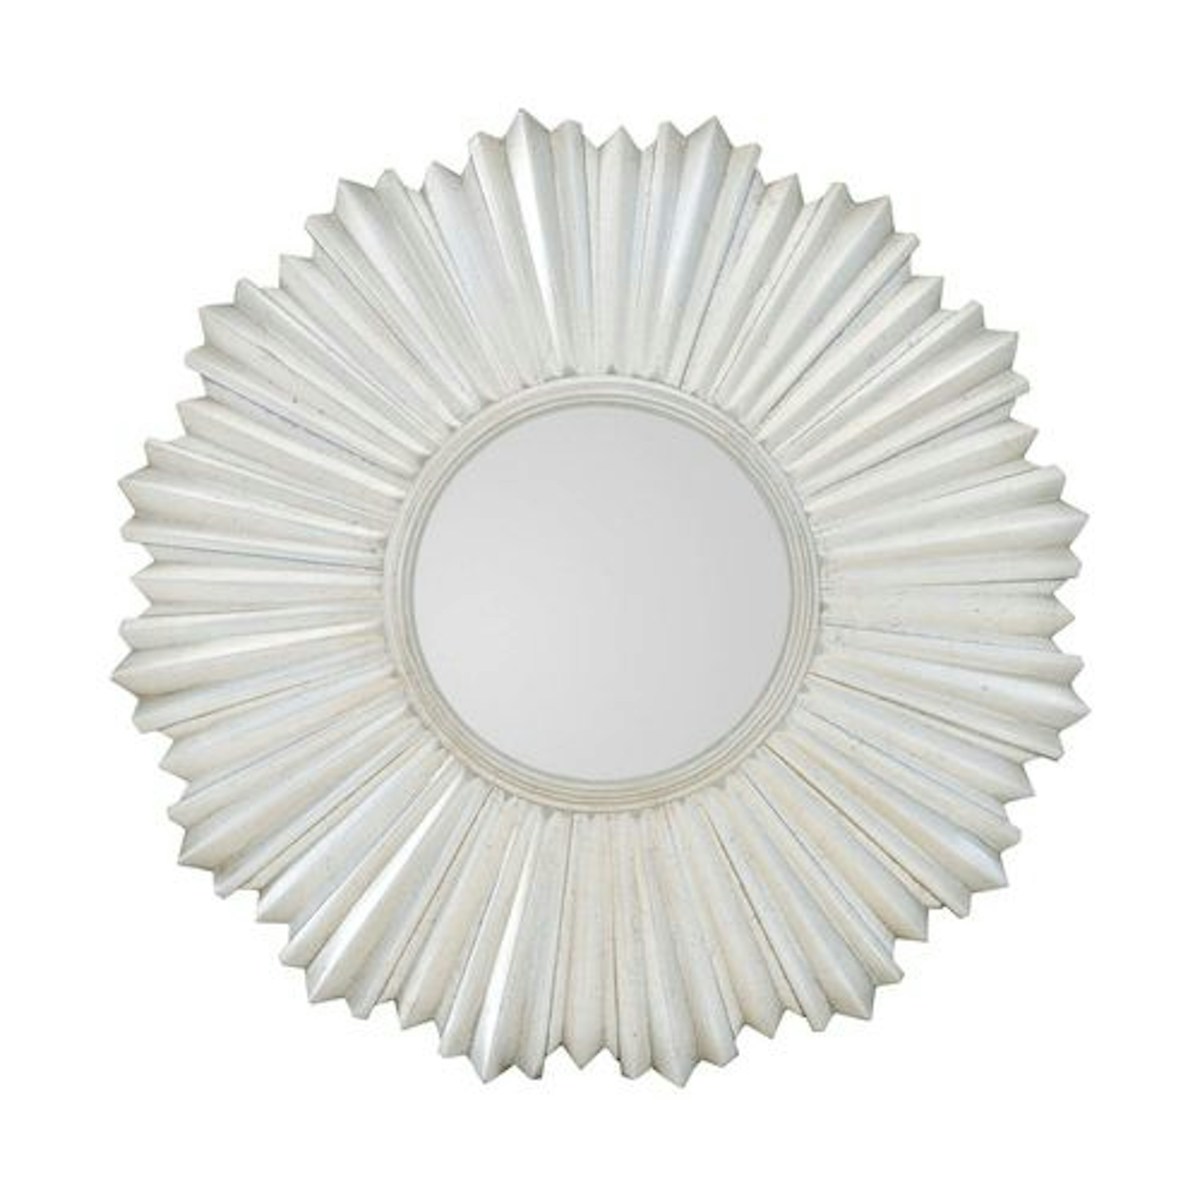 Allure Round Mirror - 9 Best Statement Wall Mirrors To Hang In Your Home - LuxDeco.com